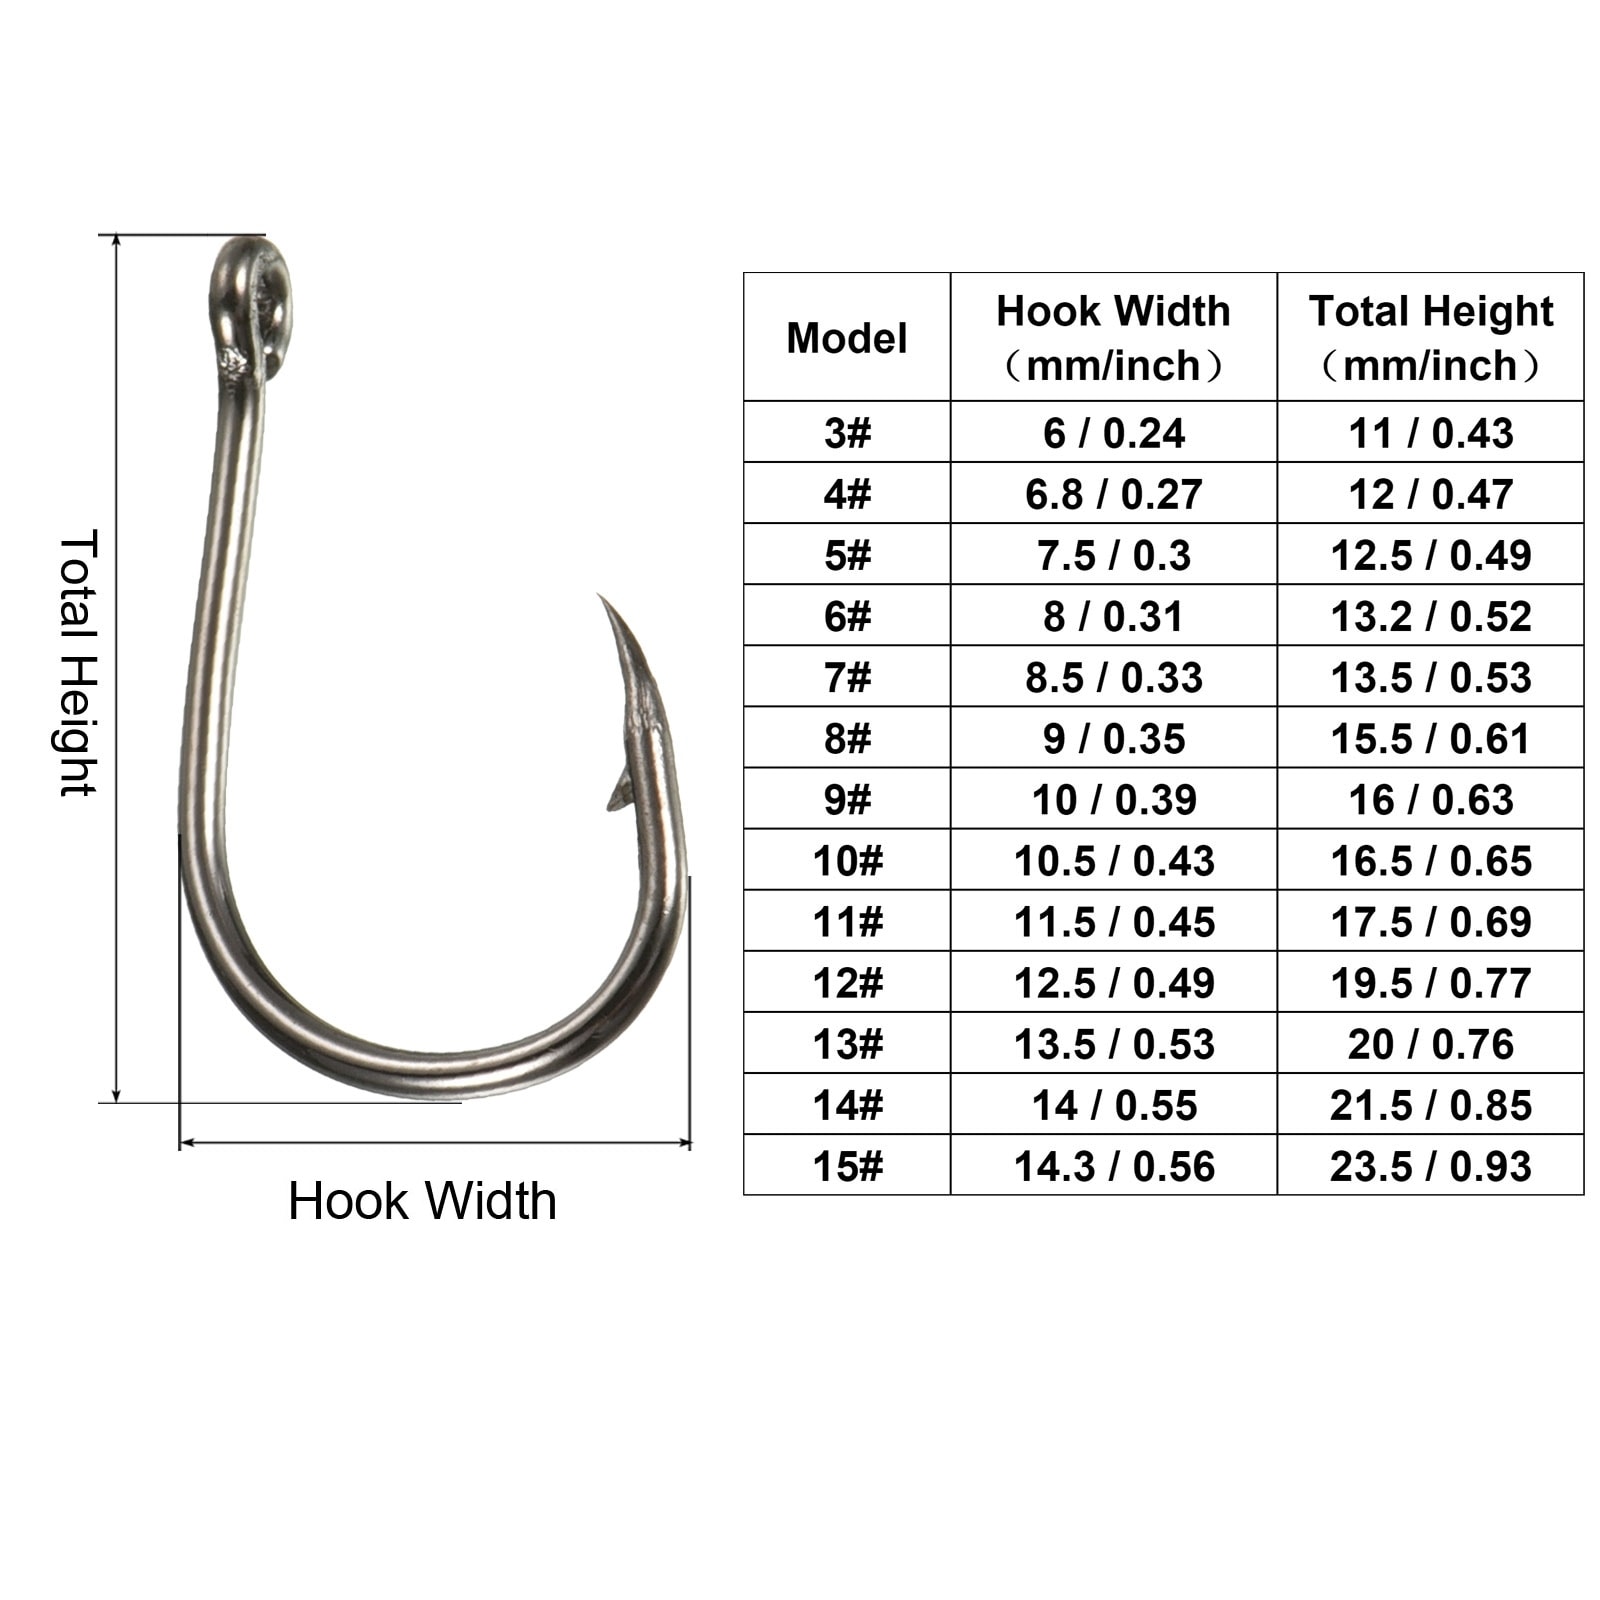 Catfish Hooks, 100 Pcs Claw Fishing Hook High Carbon Steel with Barbs